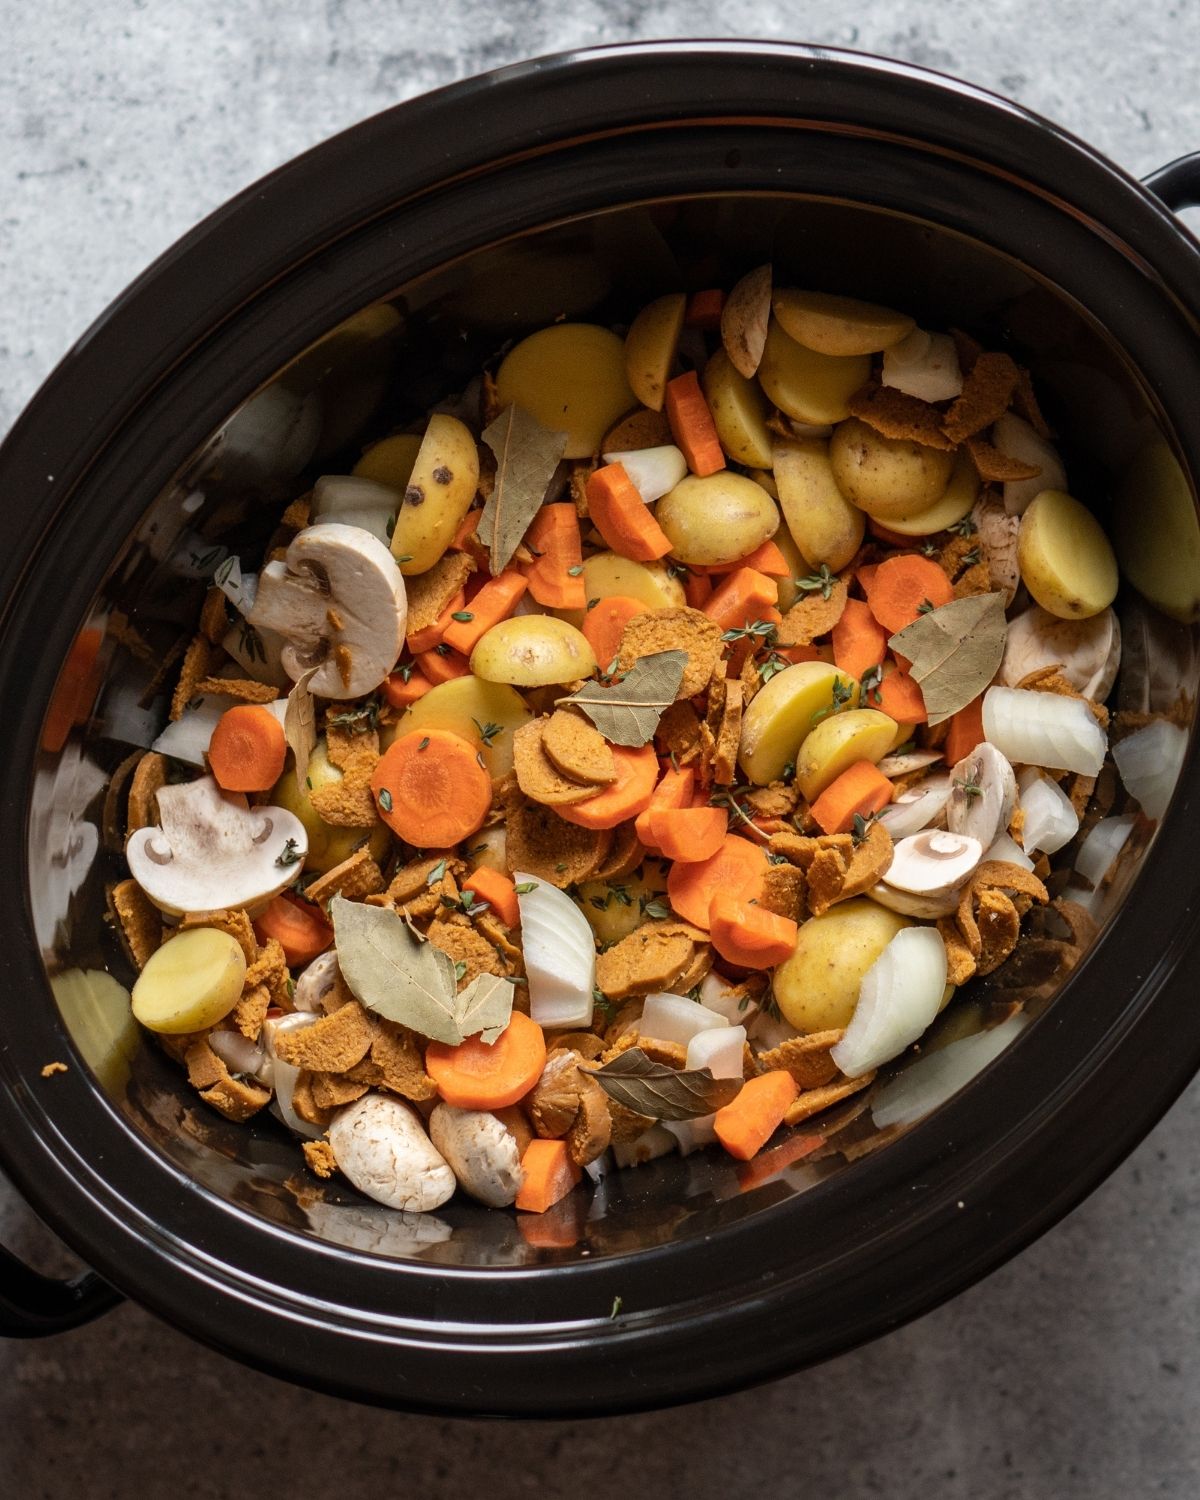 27 Crockpot Meals for Camping to Easily Make in your RV